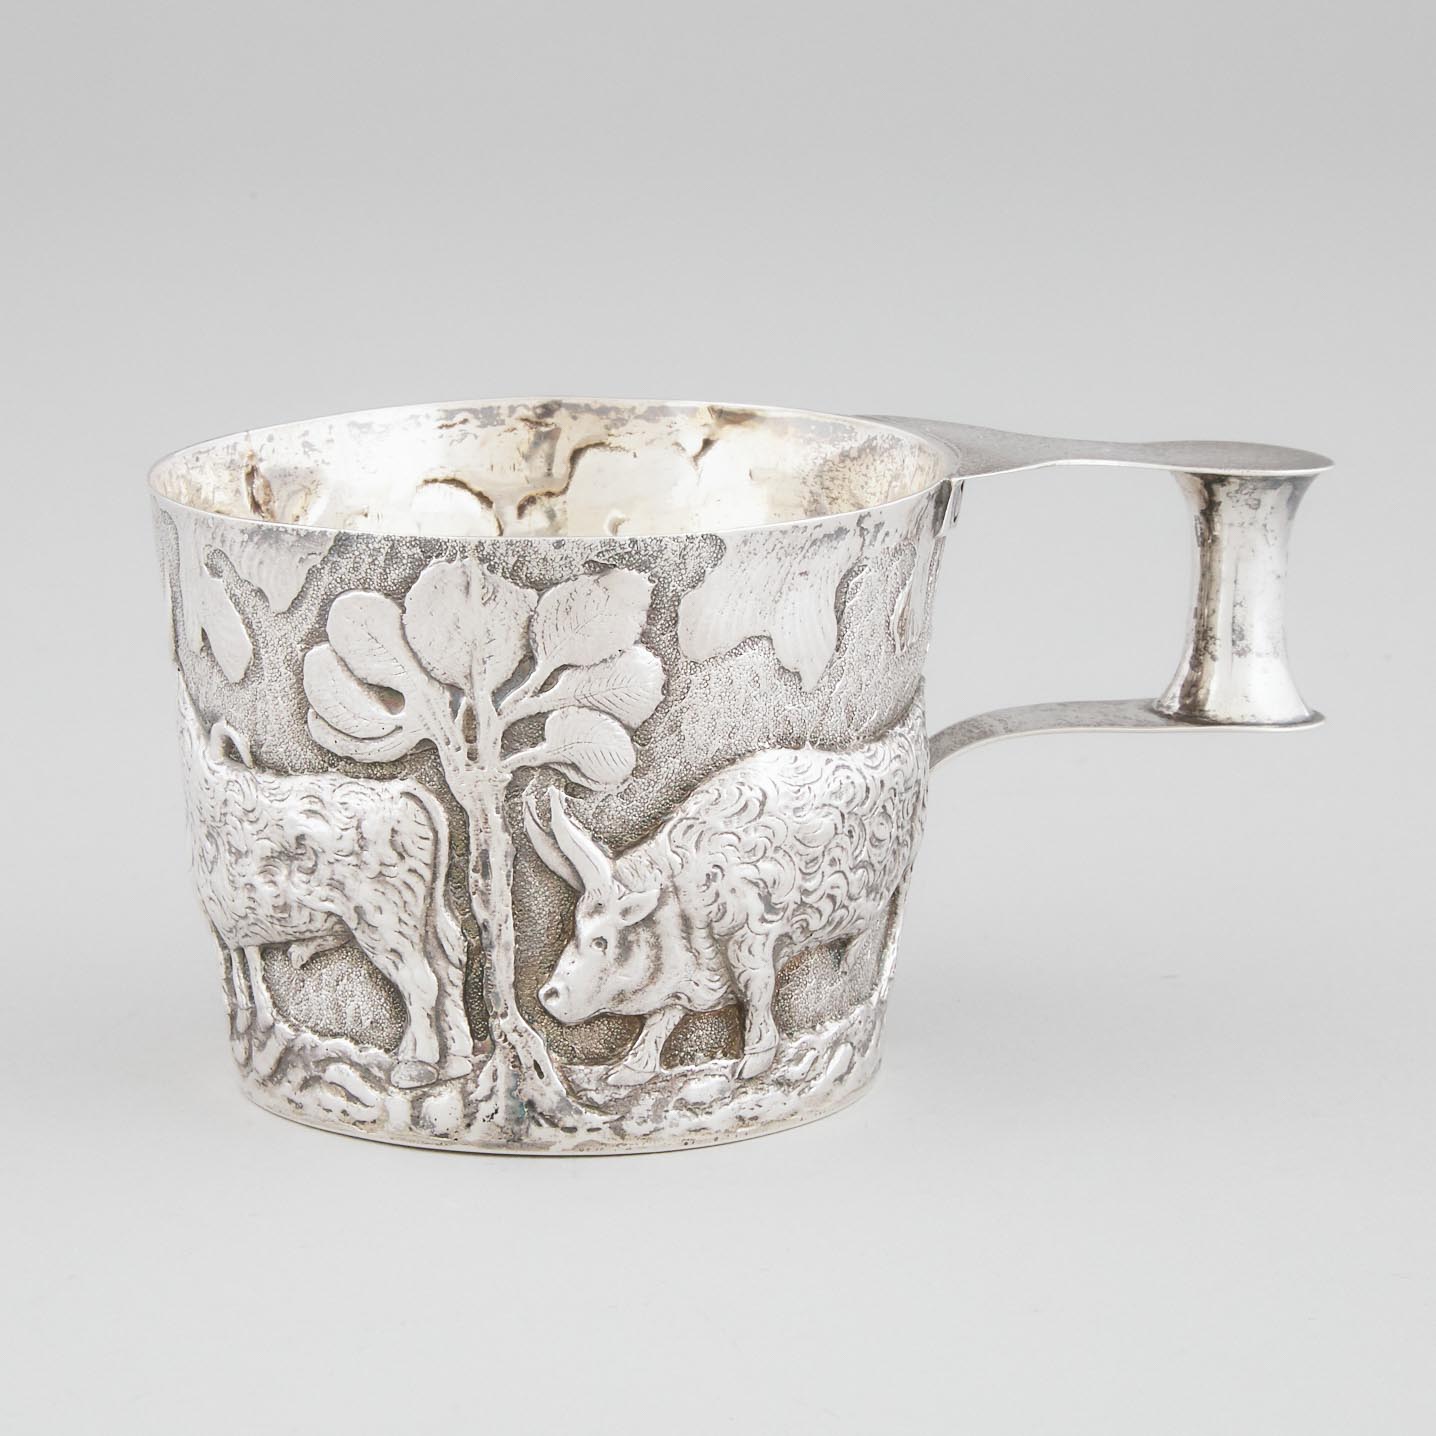 Late Victorian Silver 'Vapheio Cup', George Nathan & Ridley Hayes, Chester, 1900